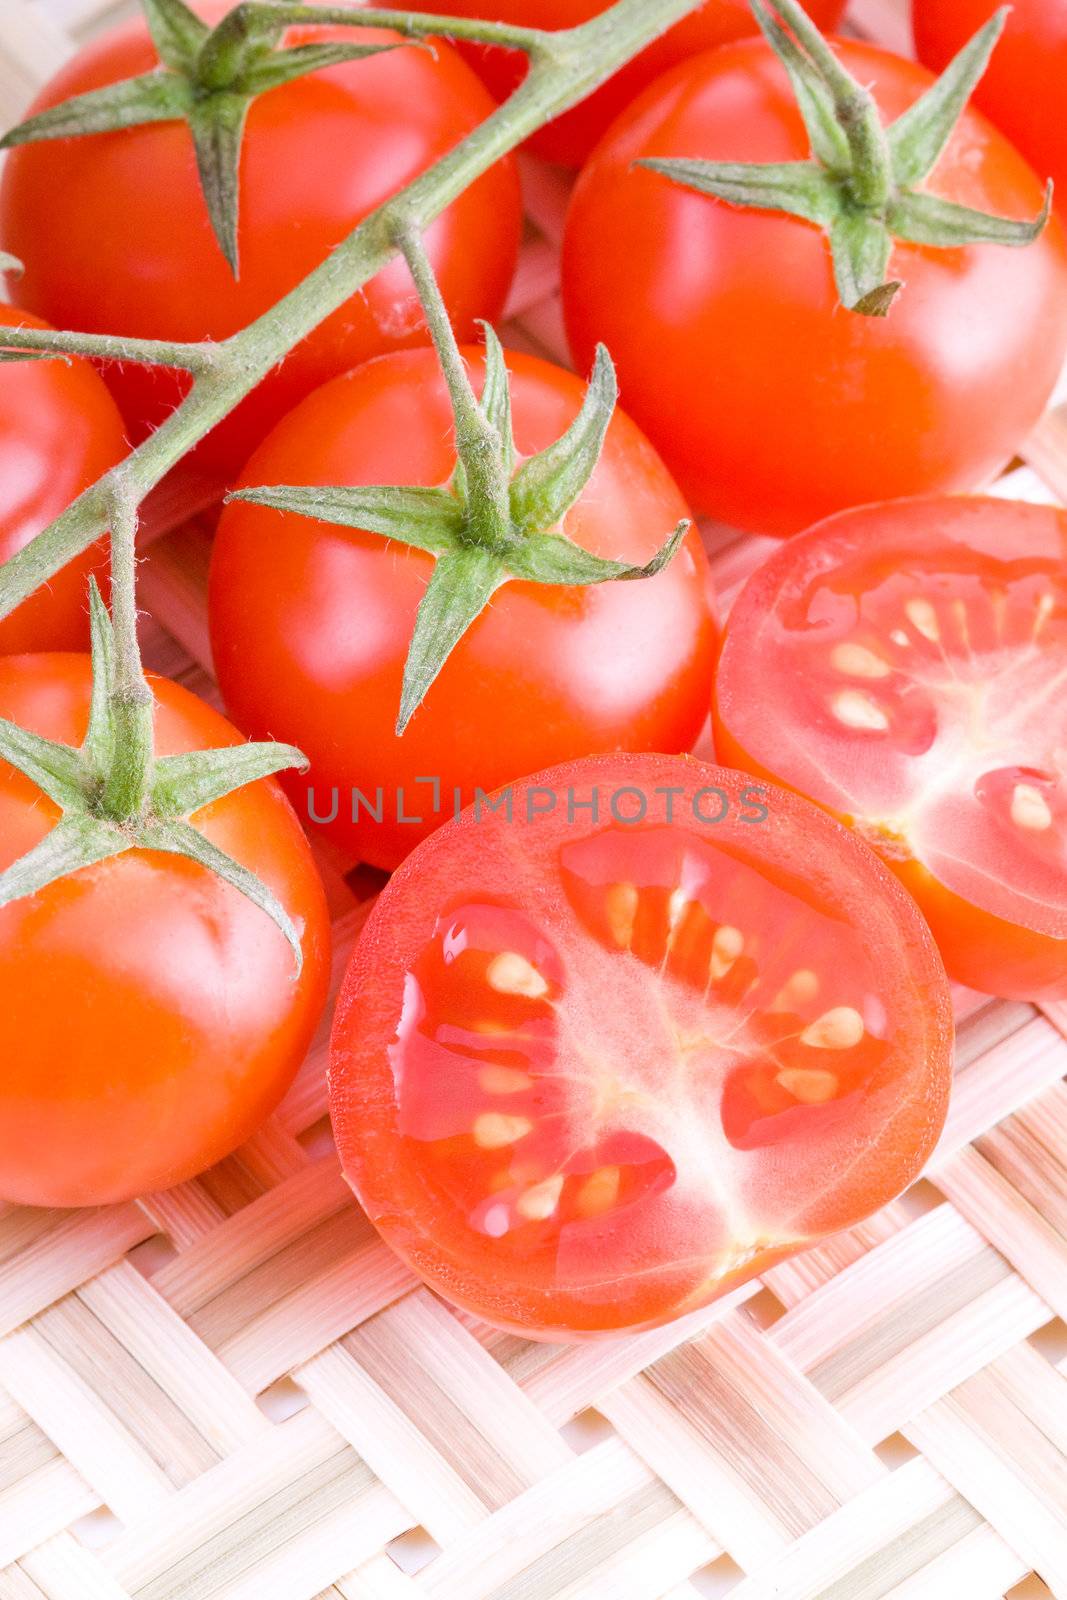 Small cocktail tomatoes on a straw braided mat